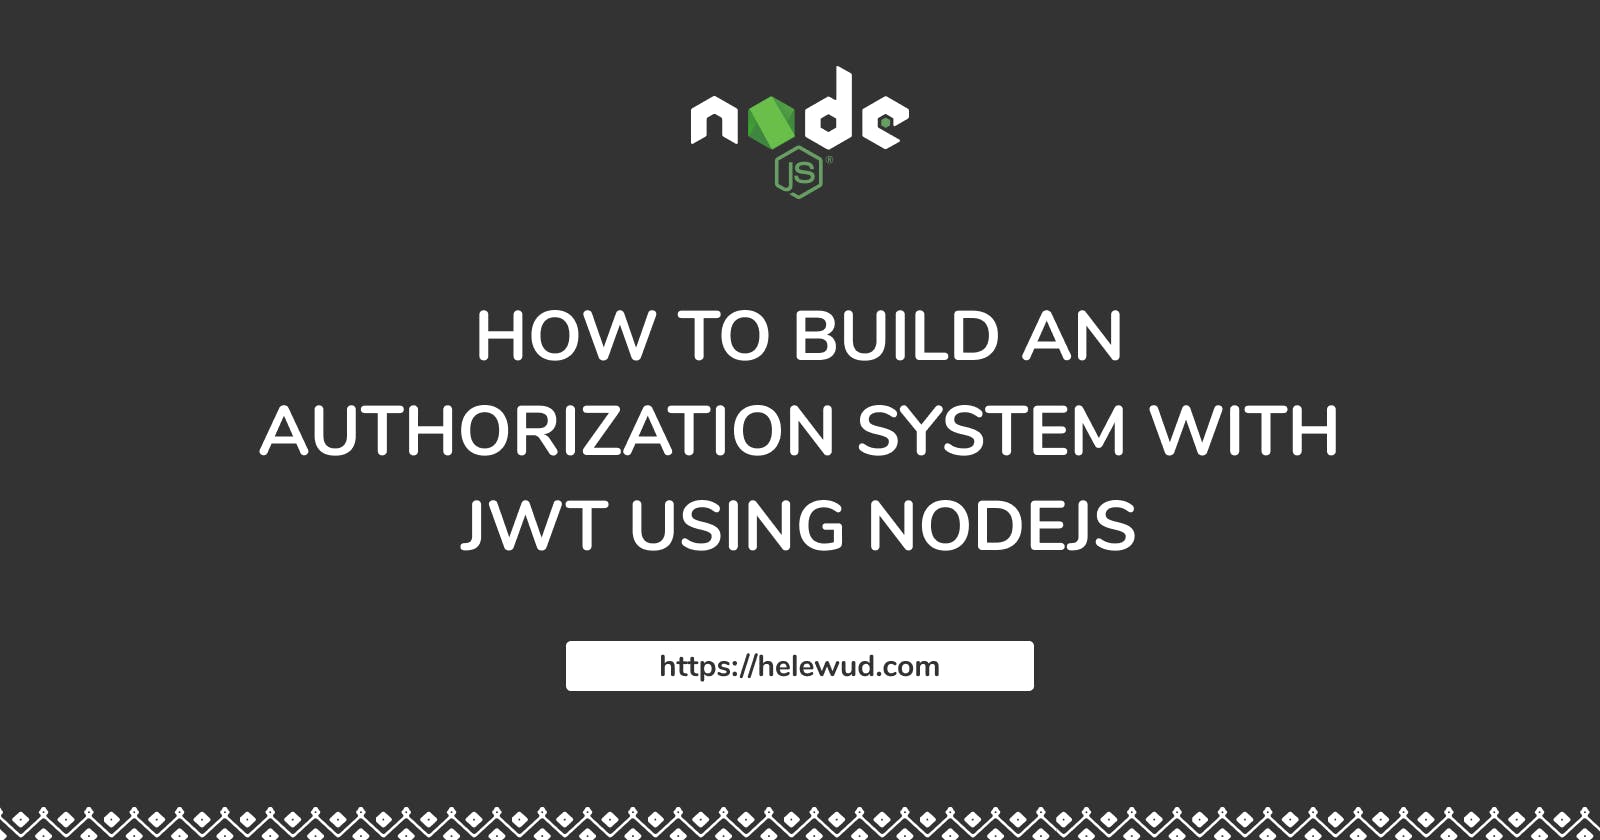 How to Build an Authorization System with JWT using Nodejs